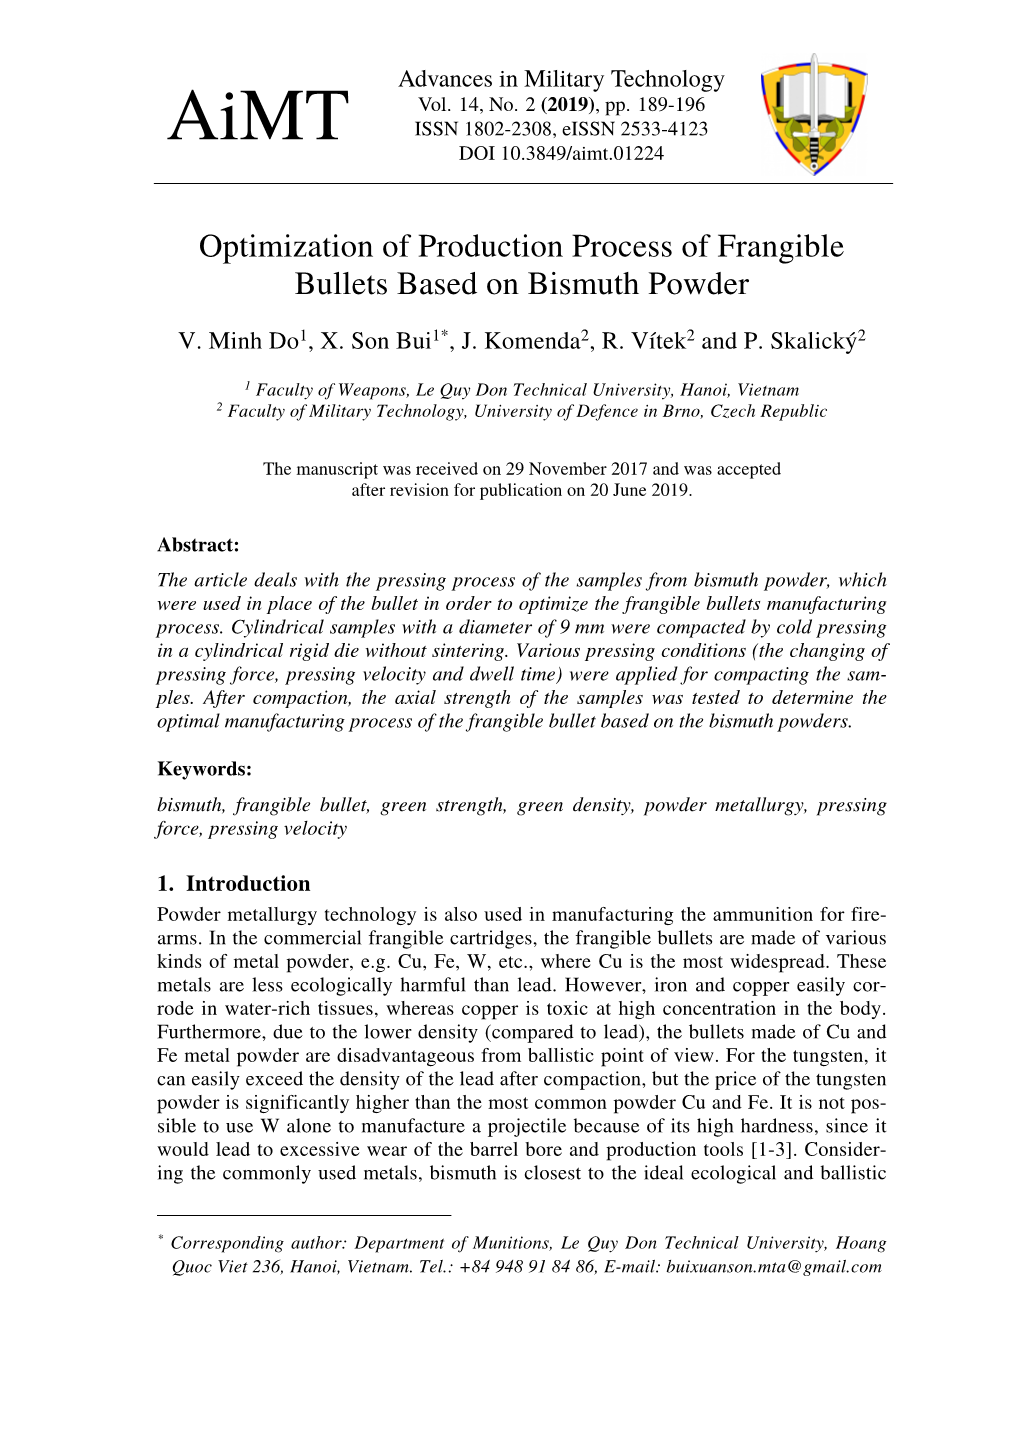 Optimization of Production Process of Frangible Bullets Based on Bismuth Powder